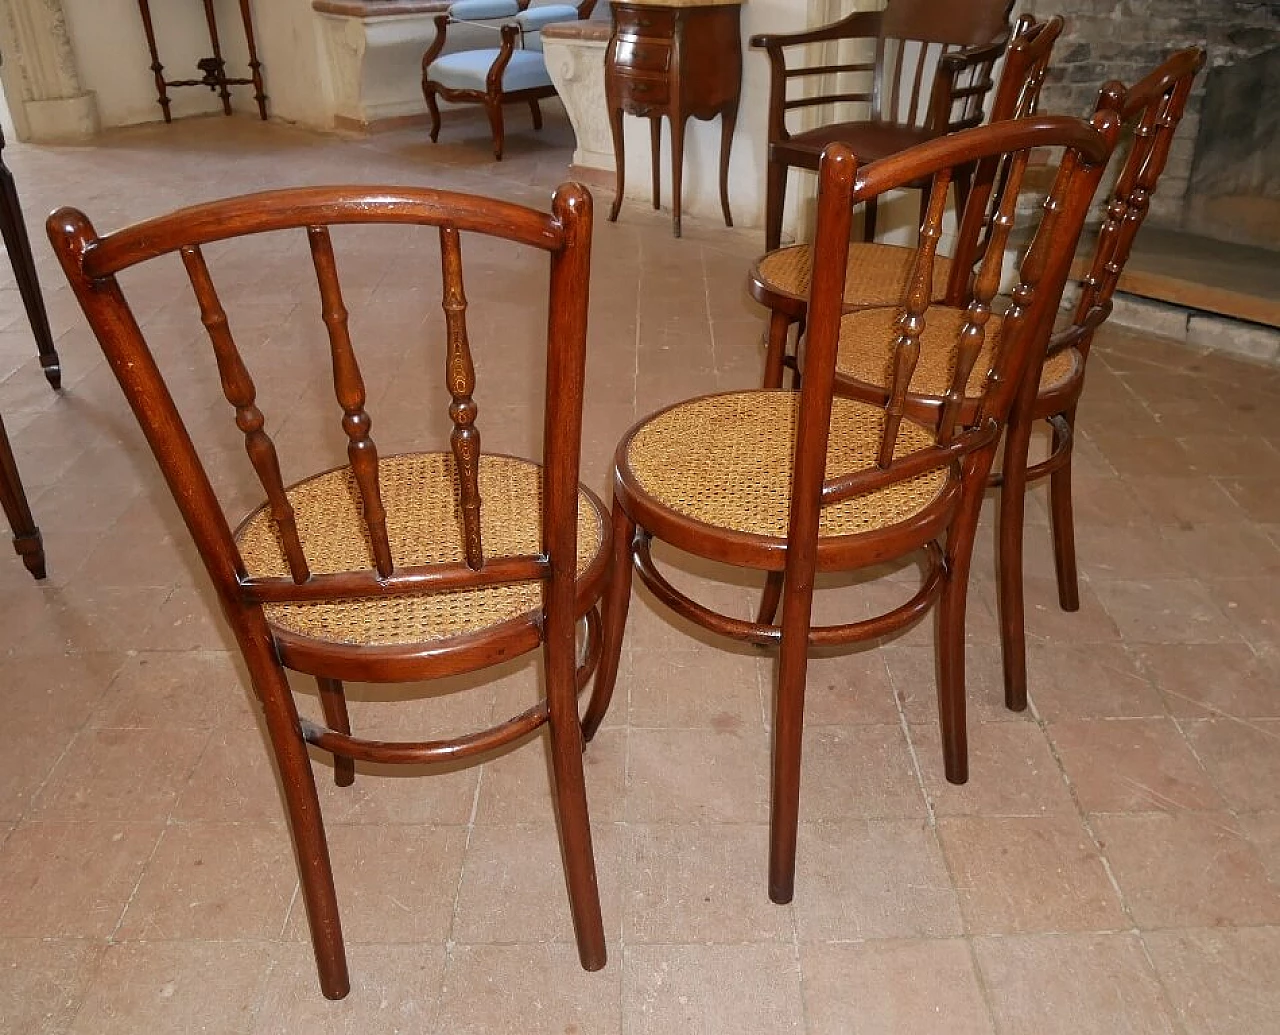 Series of 4 chairs marked with the brand J & J Kohn Wien Austria, beginning 20th century 1324150